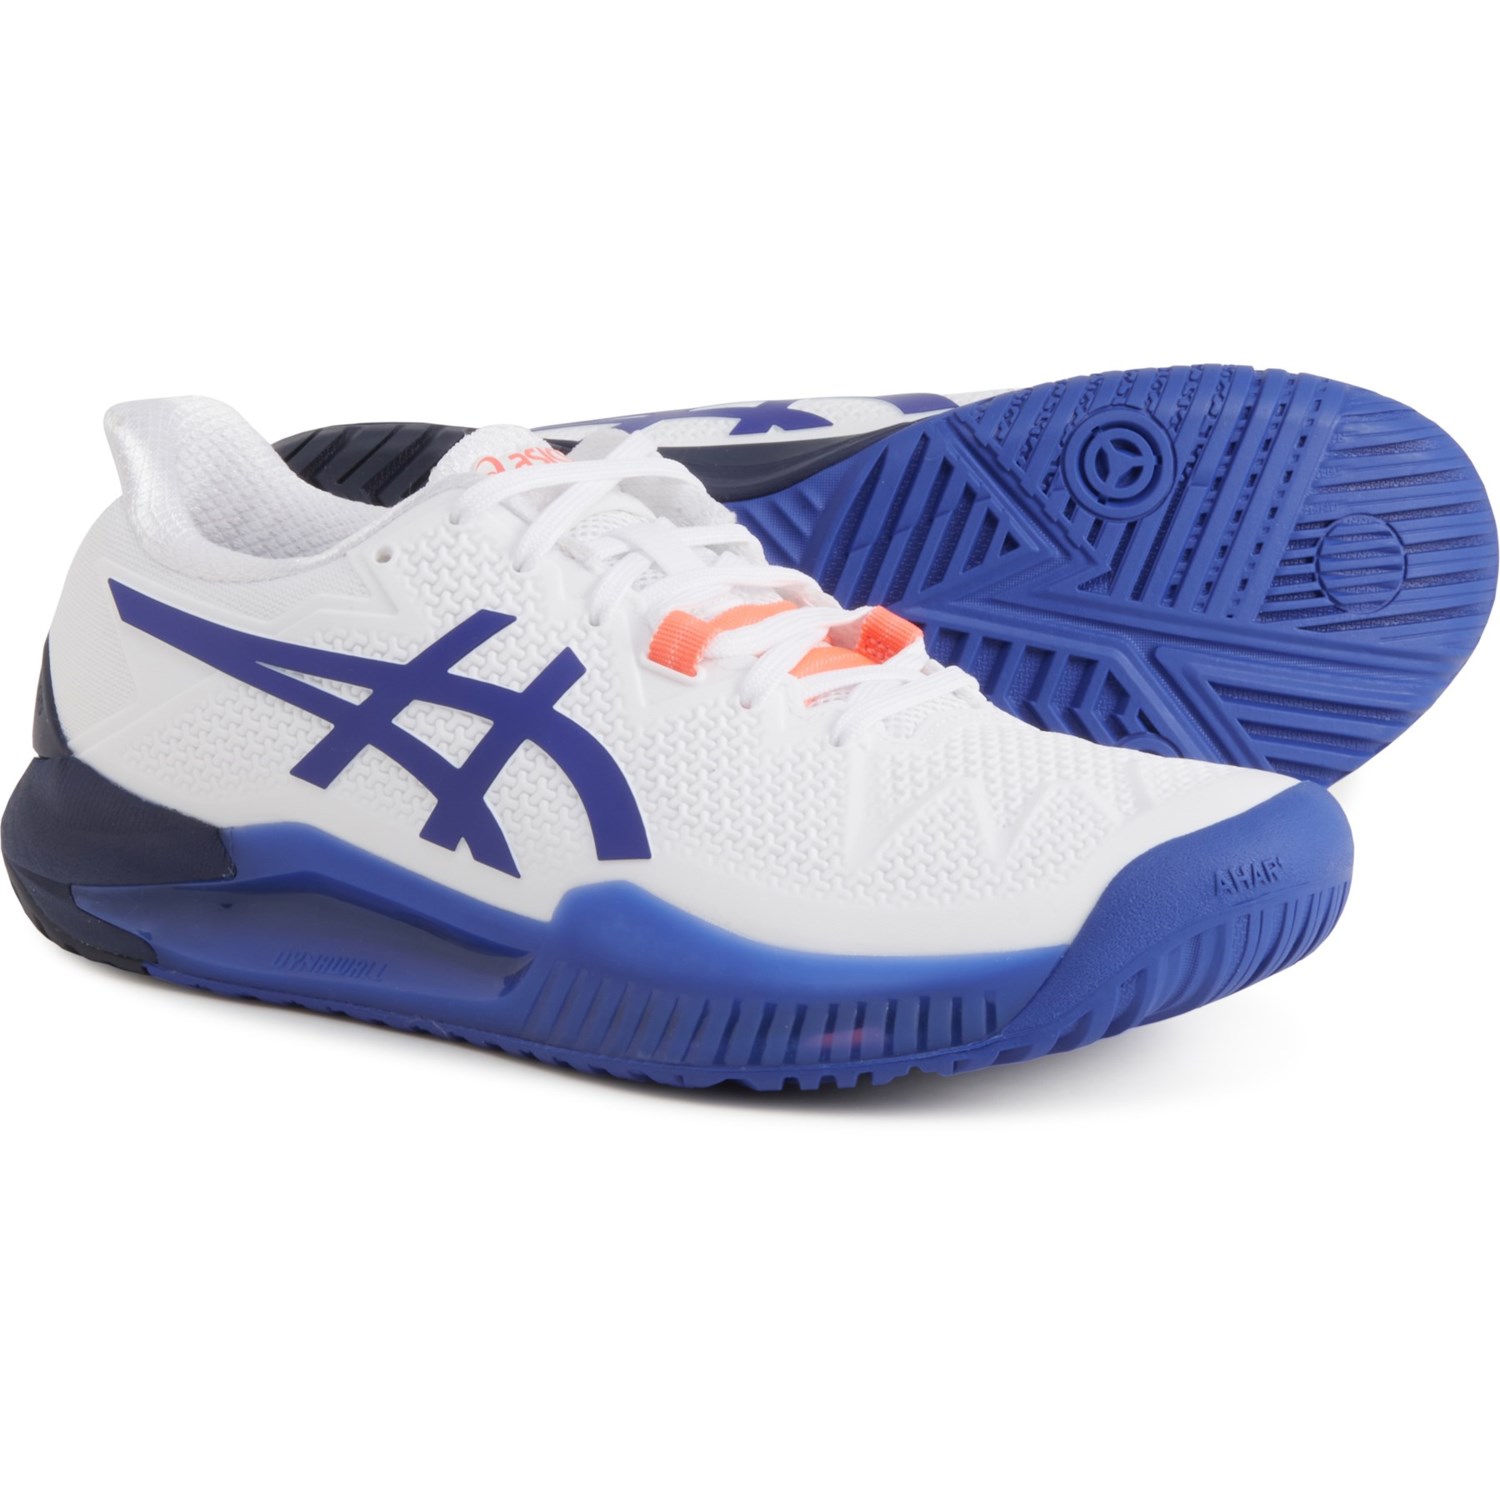 ASICS GEL® Resolution 8 Court Shoes (For Women) - Save 41%